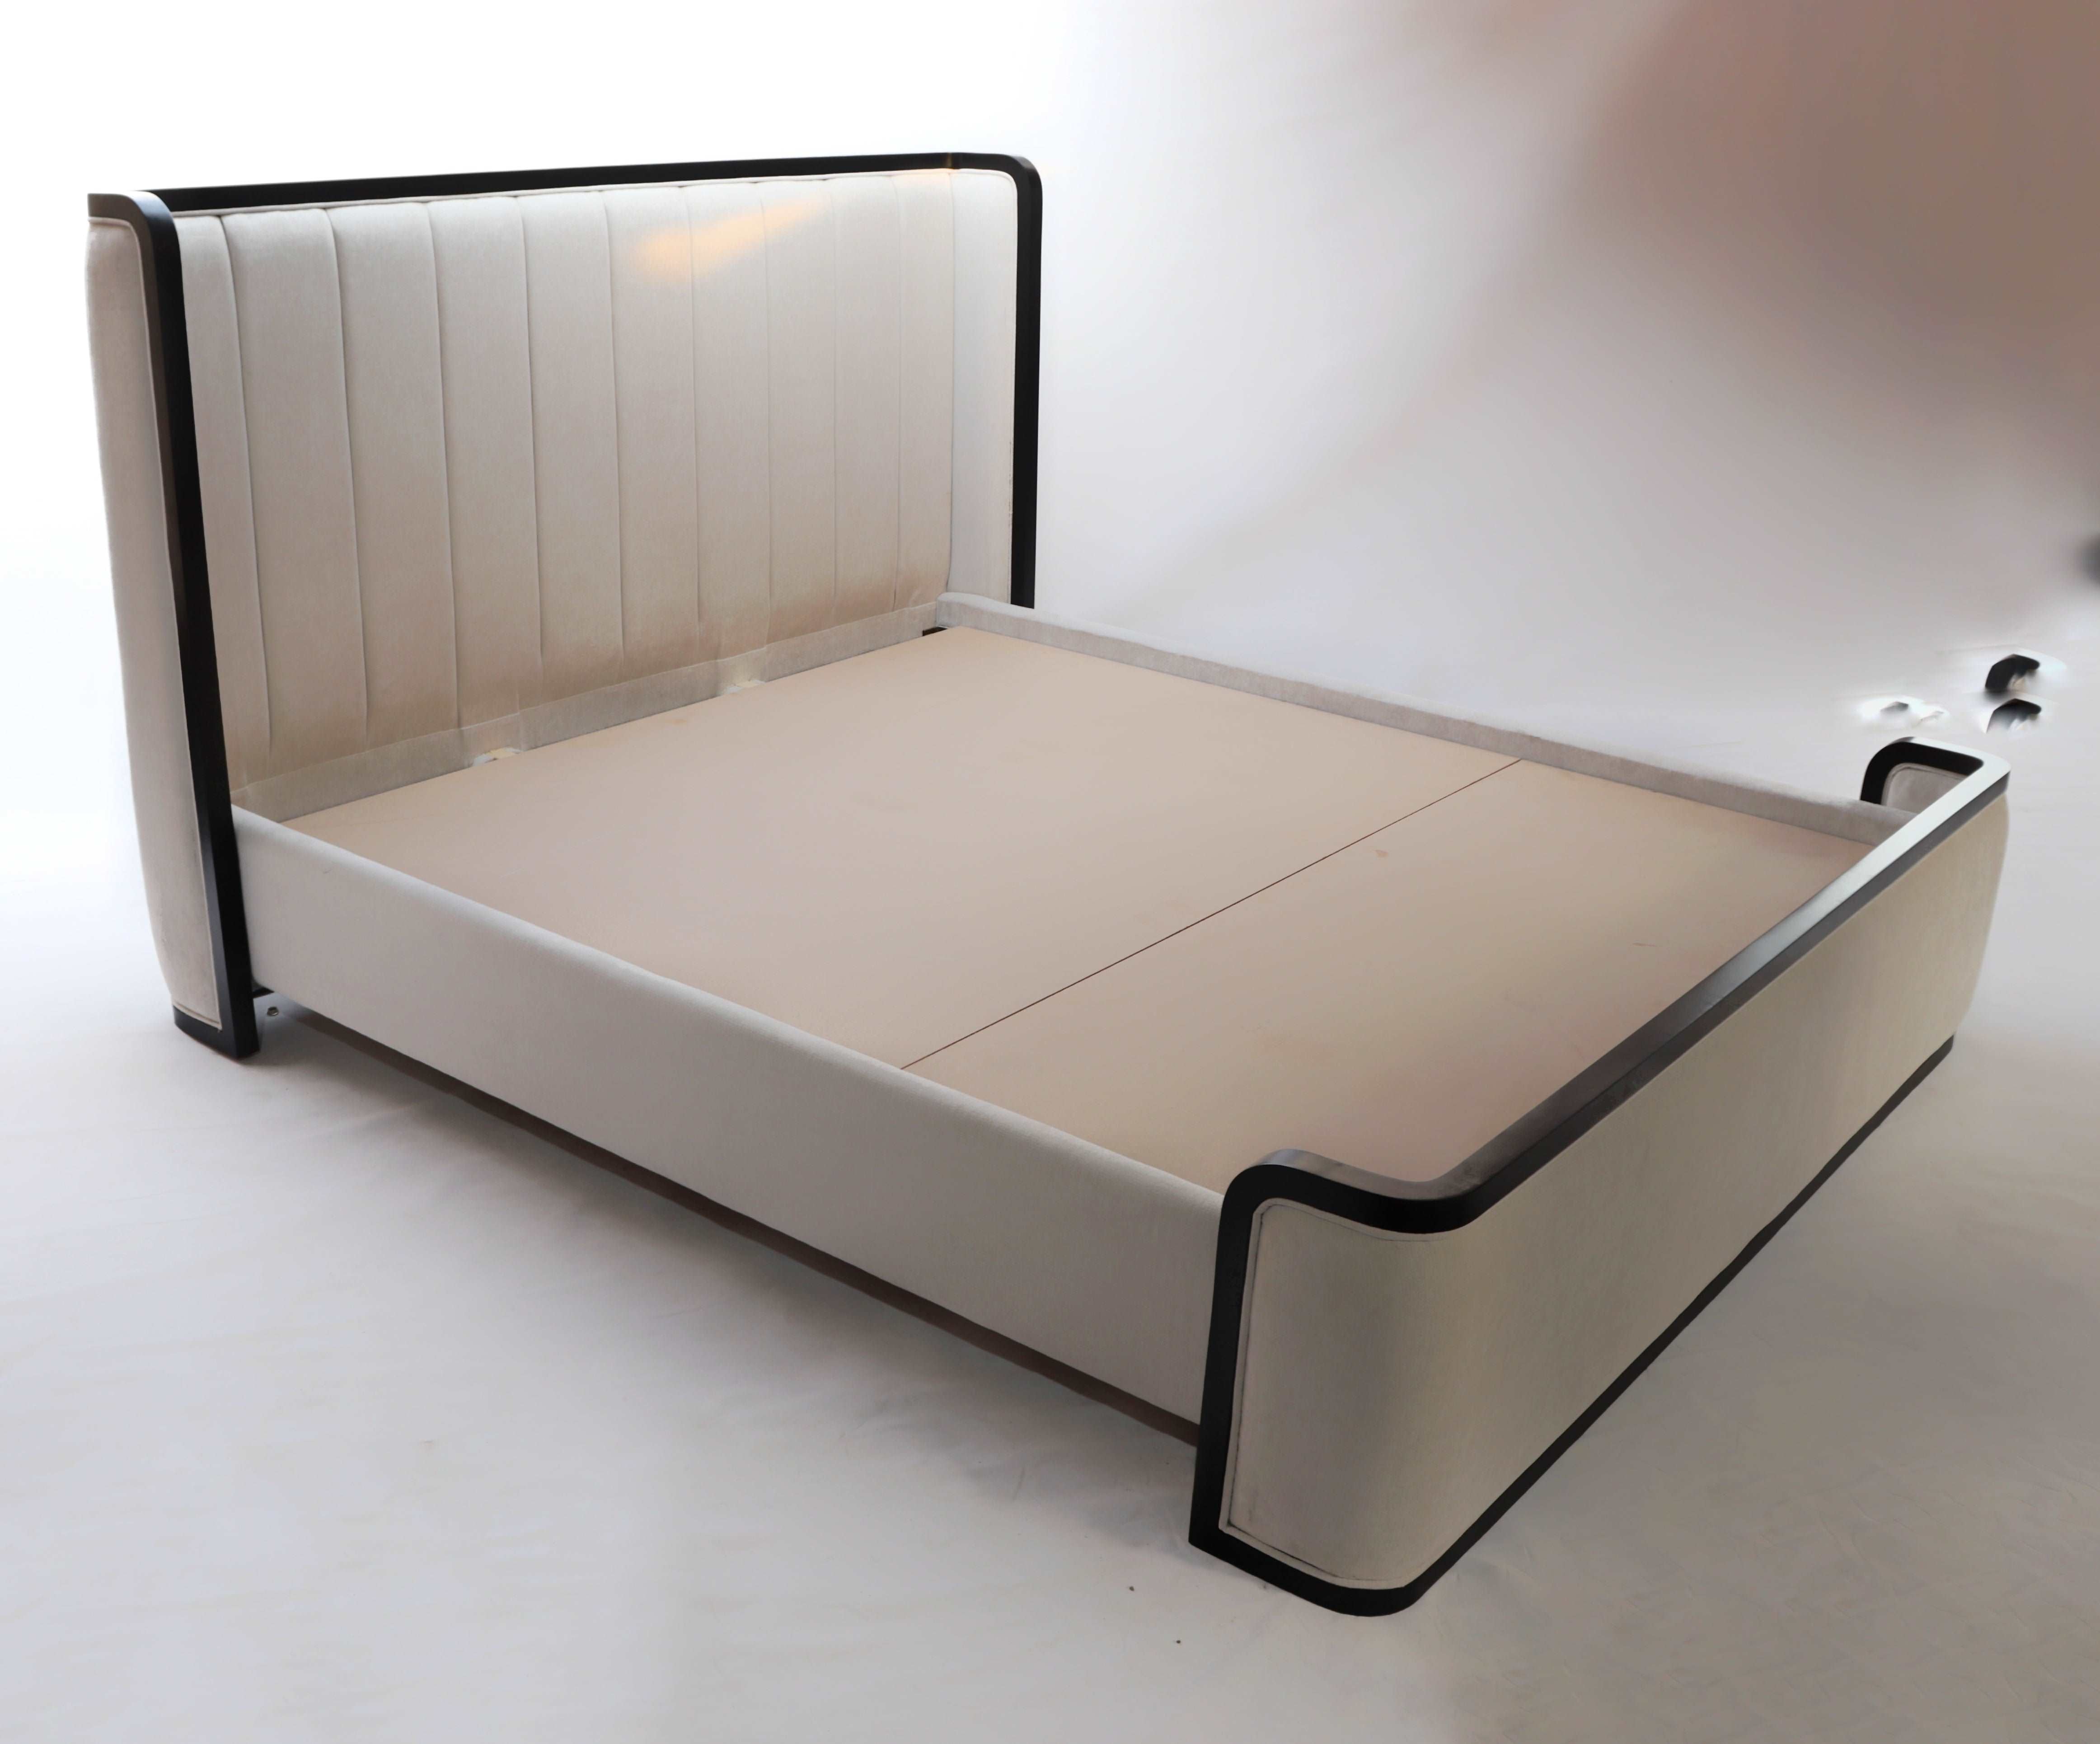 Sumptuous bed featuring solid wood construction and plush tufted upholstery for unparalleled comfort and style.